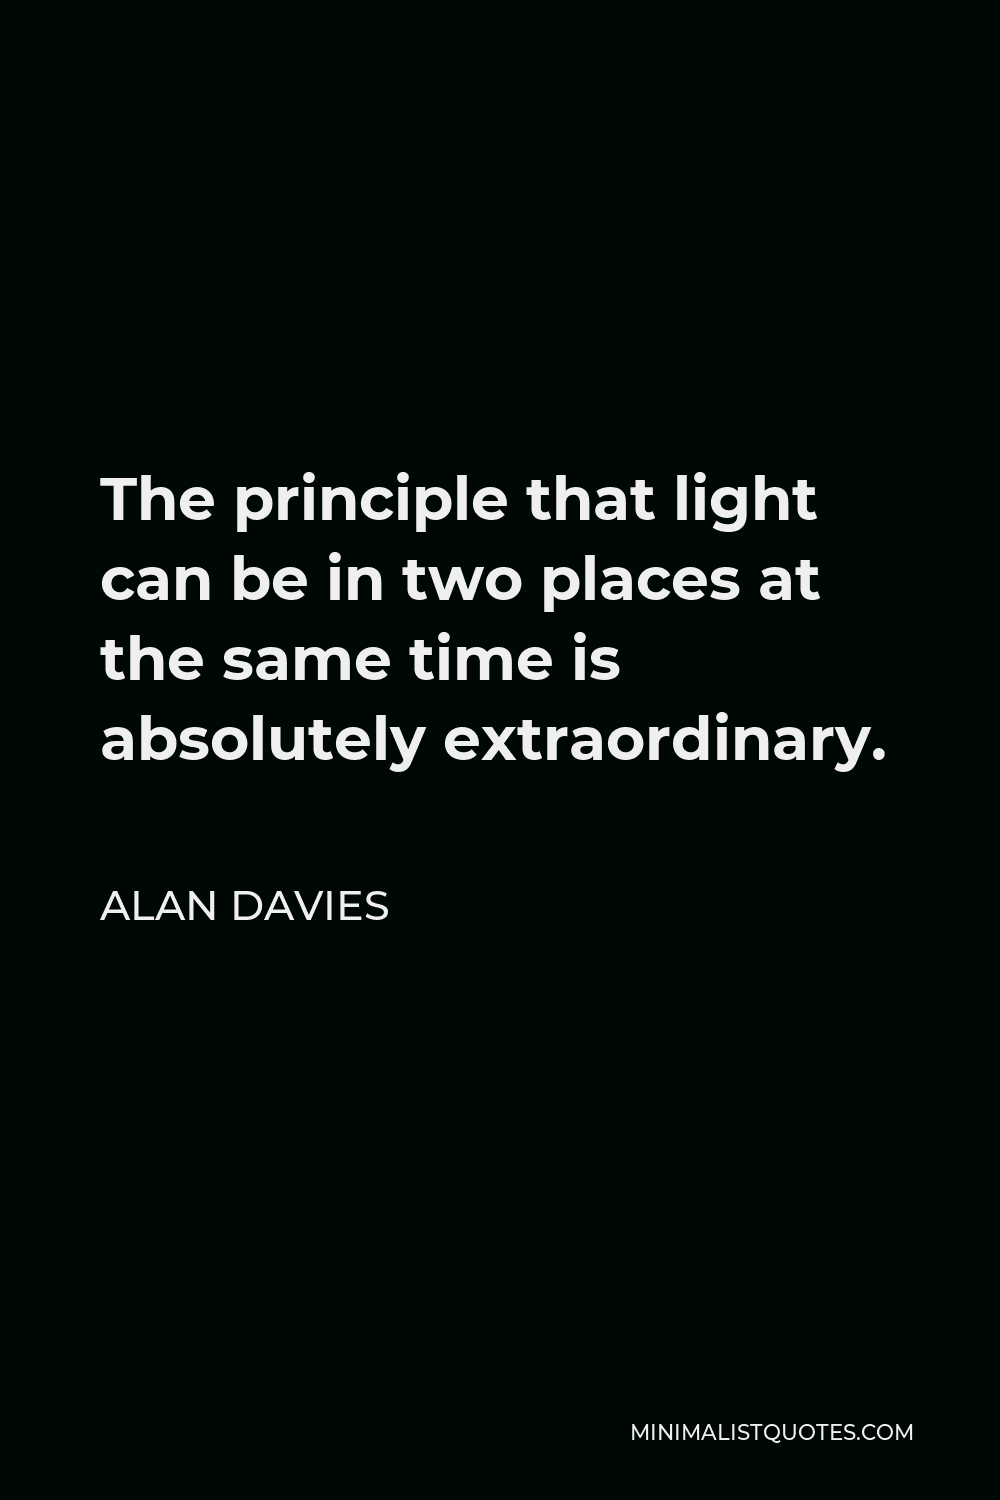 Alan Davies Quote - The principle that light can be in two places at the same time is absolutely extraordinary.